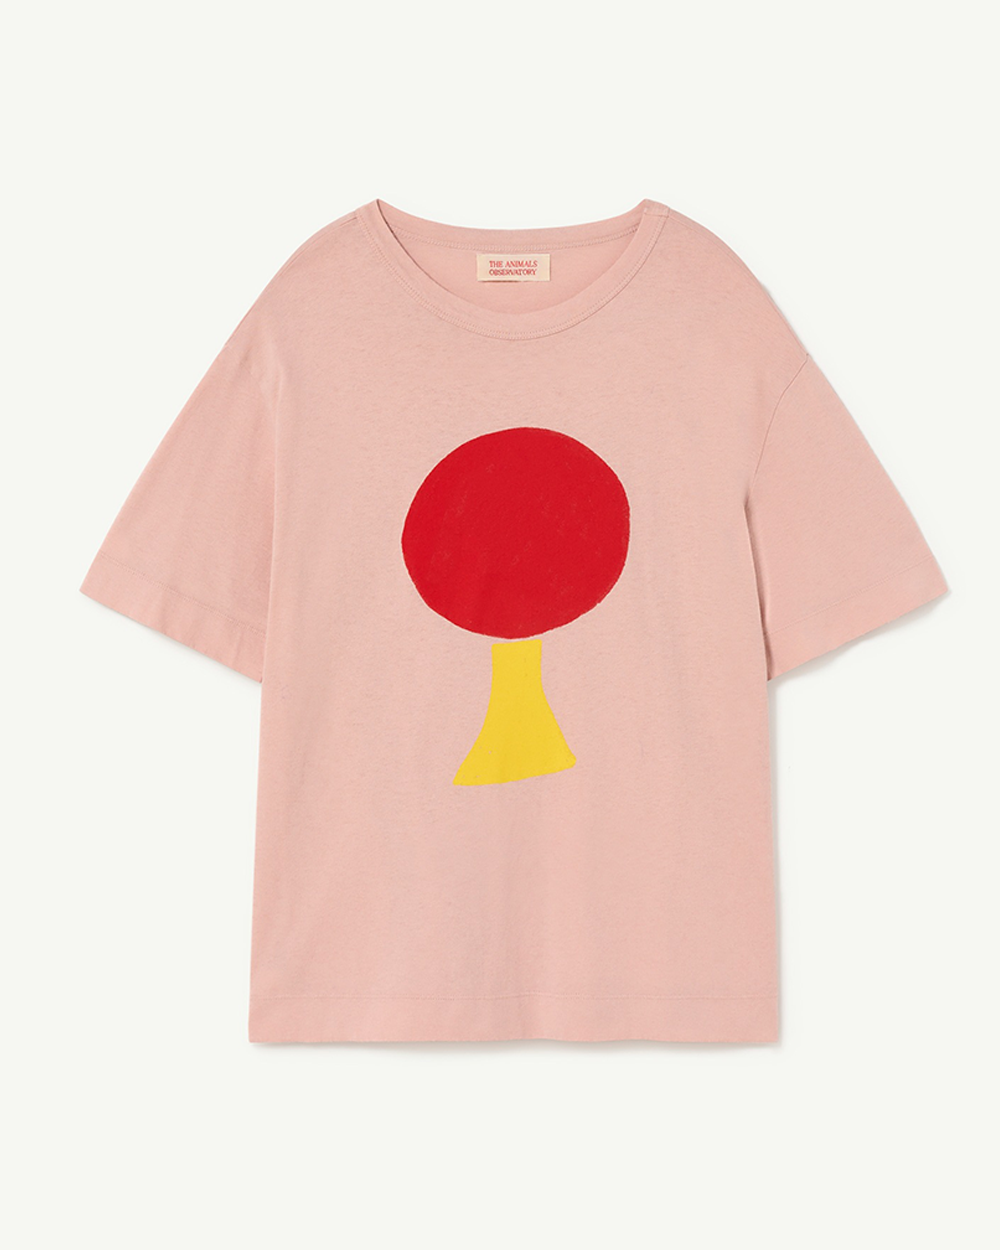 [TAO] F23019-301_ED / ROOSTER OVERSIZE KIDS T-SHIRT Rose [3Y, 6Y, 10Y]